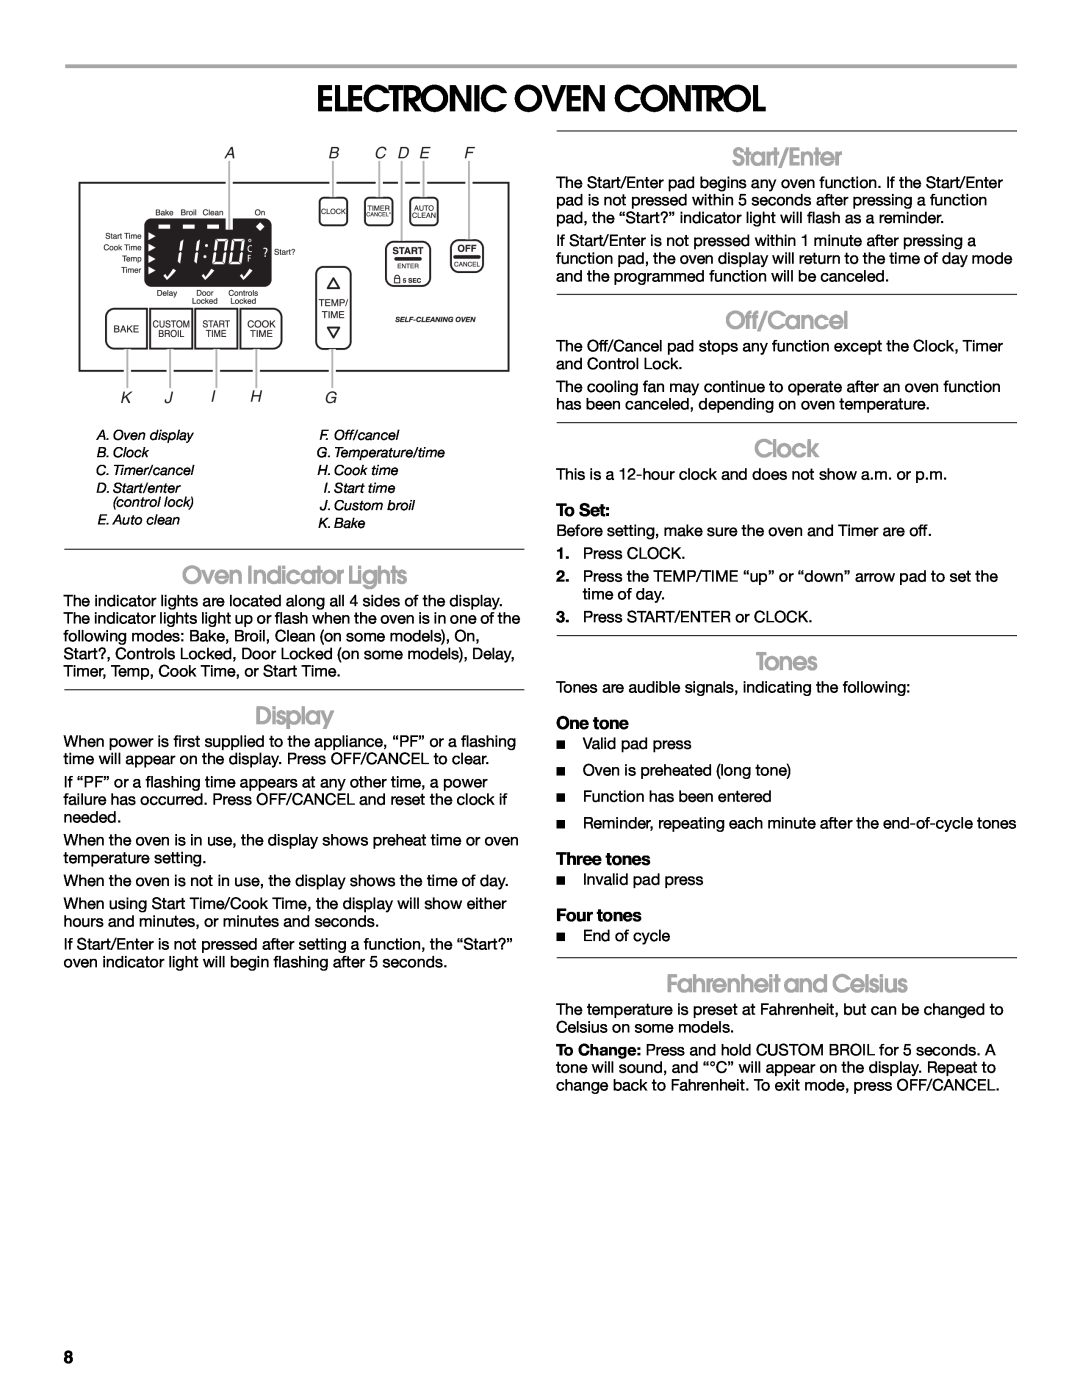 Whirlpool 9762362A Electronic Oven Control, Oven Indicator Lights, Display, Start/Enter, Off/Cancel, Clock, Tones, To Set 